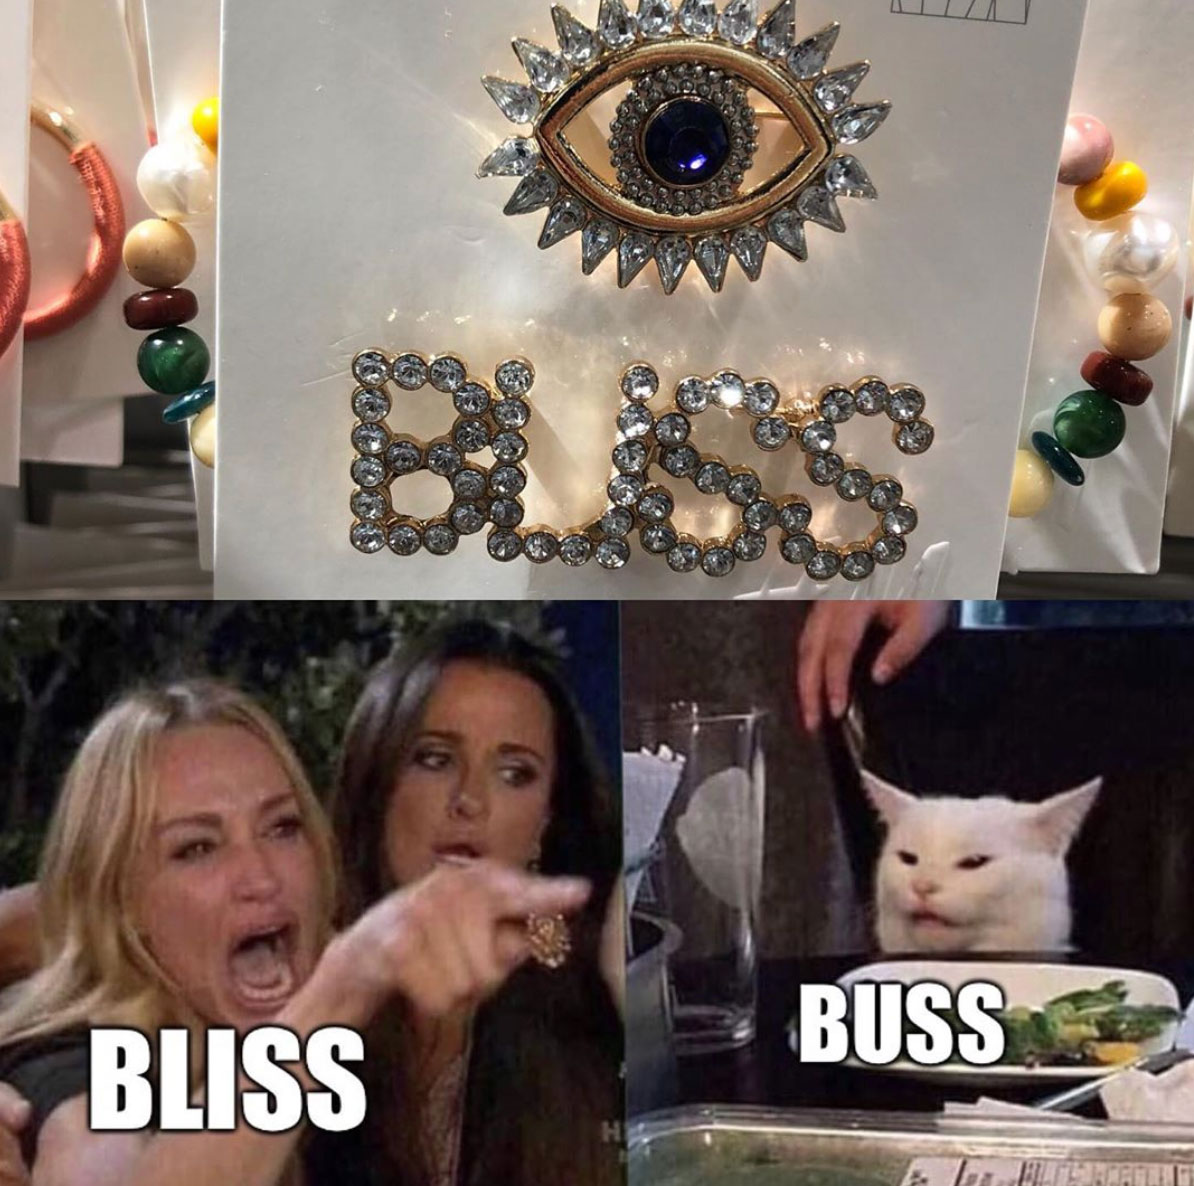 woman yelling at a cat memes, woman yelling at cat meme, funny meme woman cat yelling, memes real housewives of beverly hills cat, cat yelling meme, best memes 2019, the real housewives of beverly hills, taylor armstrong, kyle richards, smudge the cat